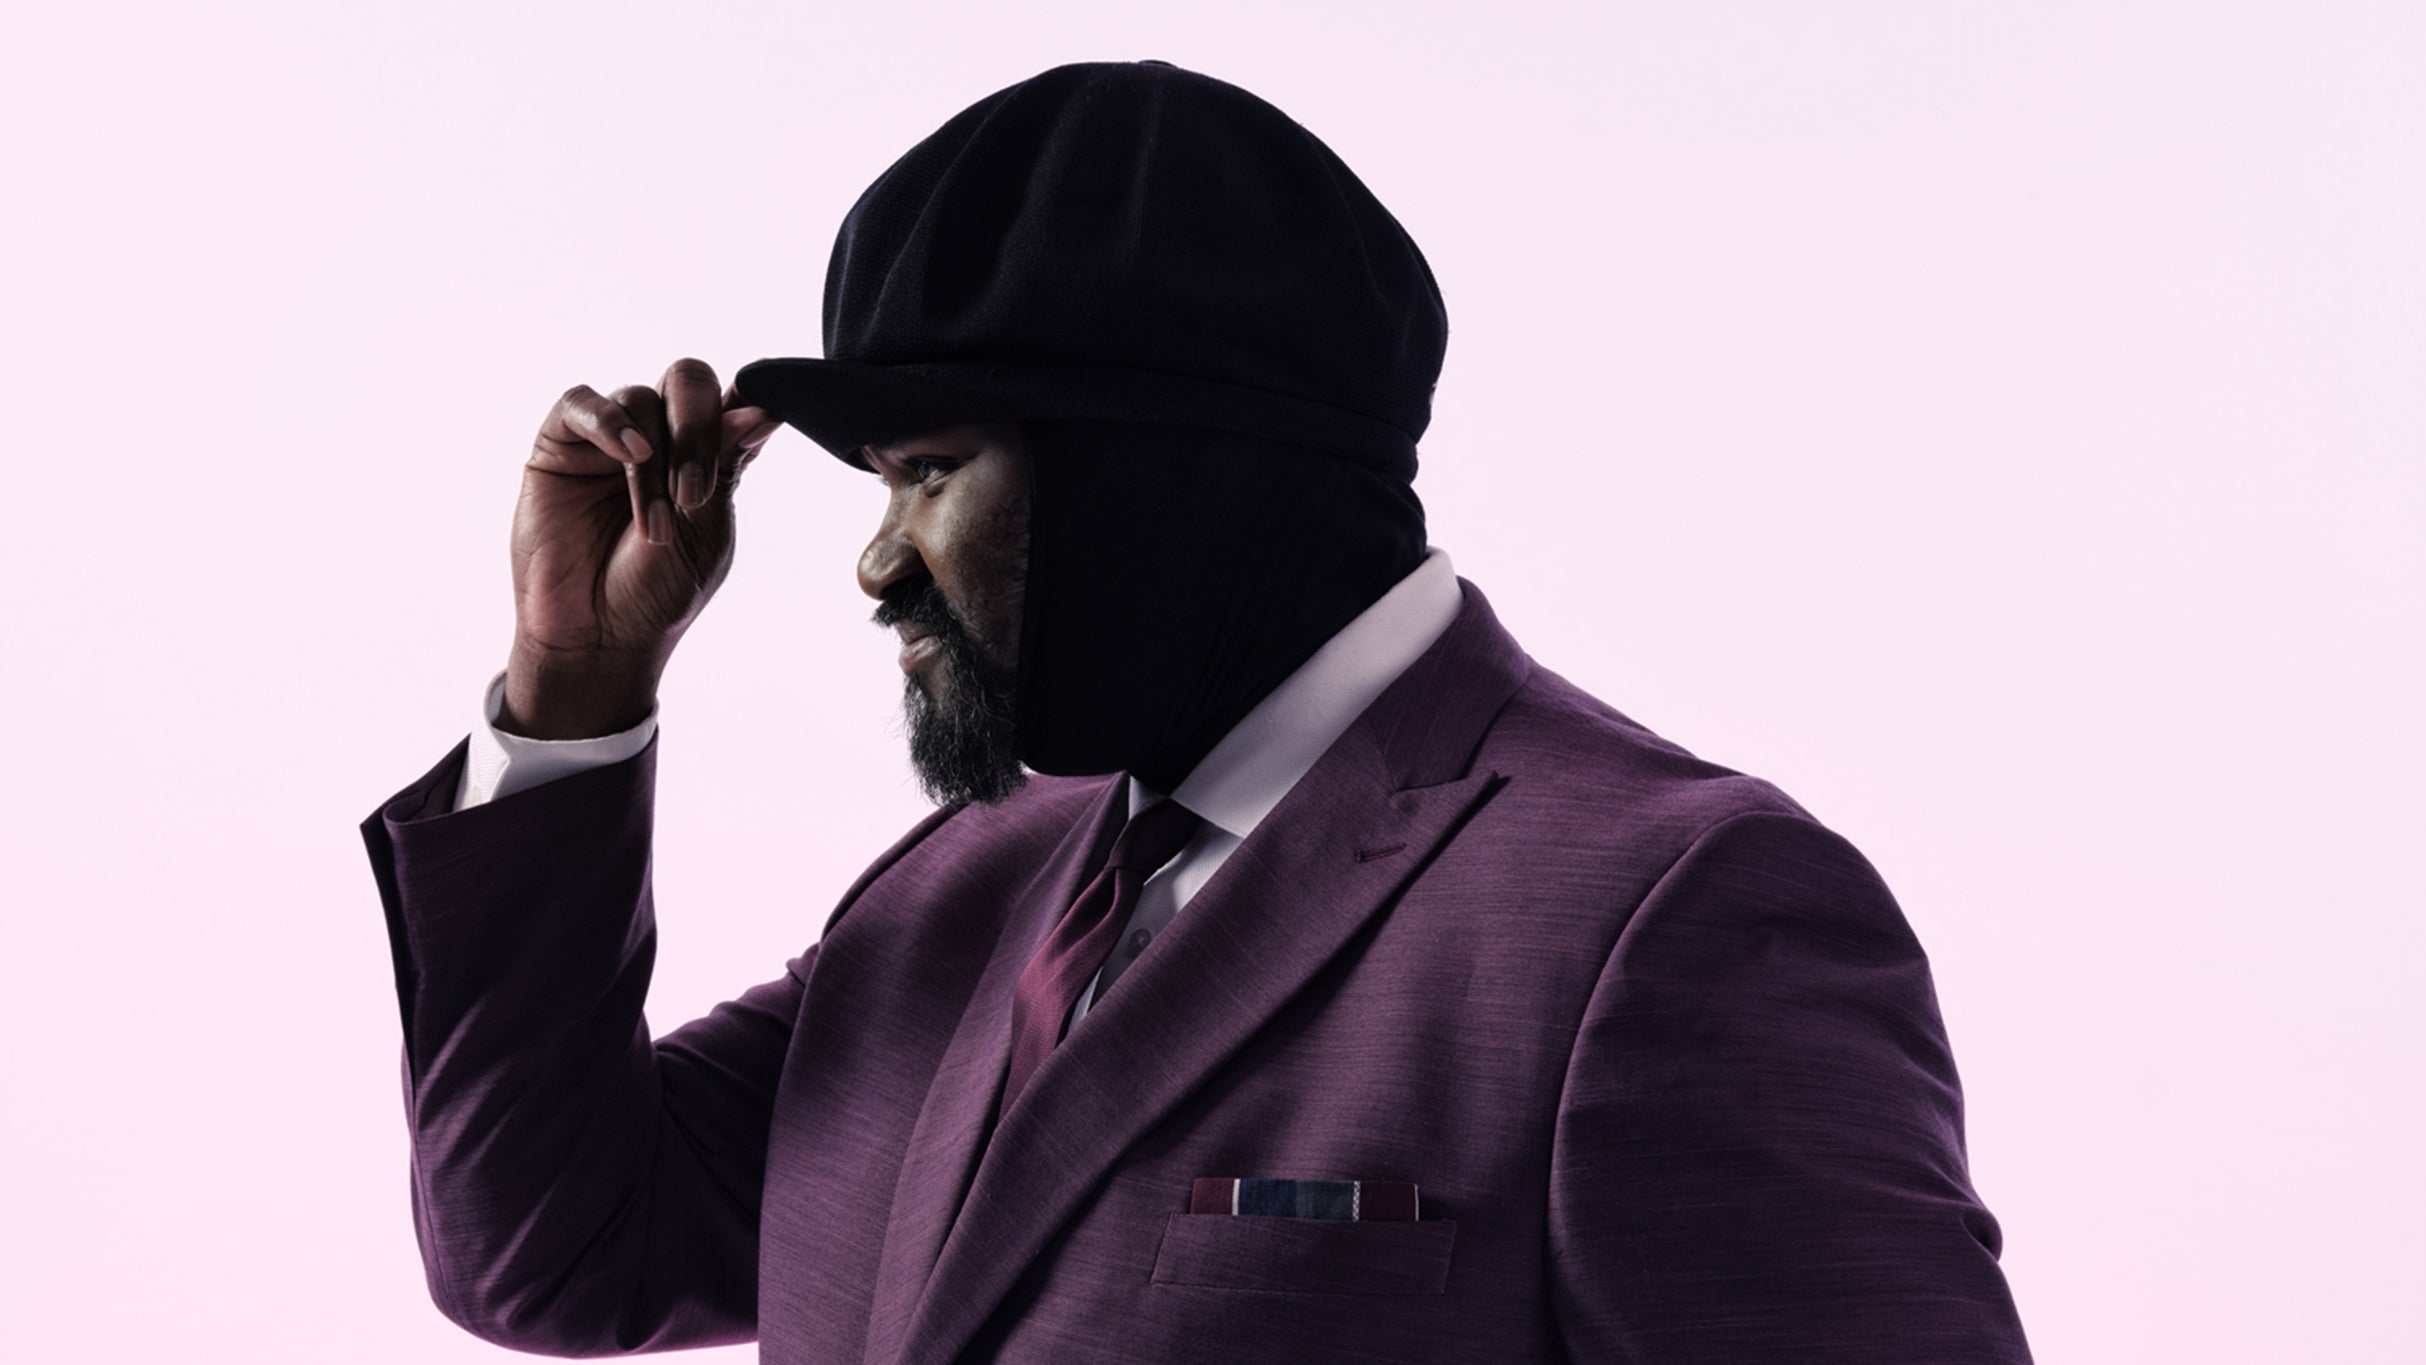 An evening with Gregory Porter free presale info for event tickets in Durham, NC (DPAC - Durham Performing Arts Center)